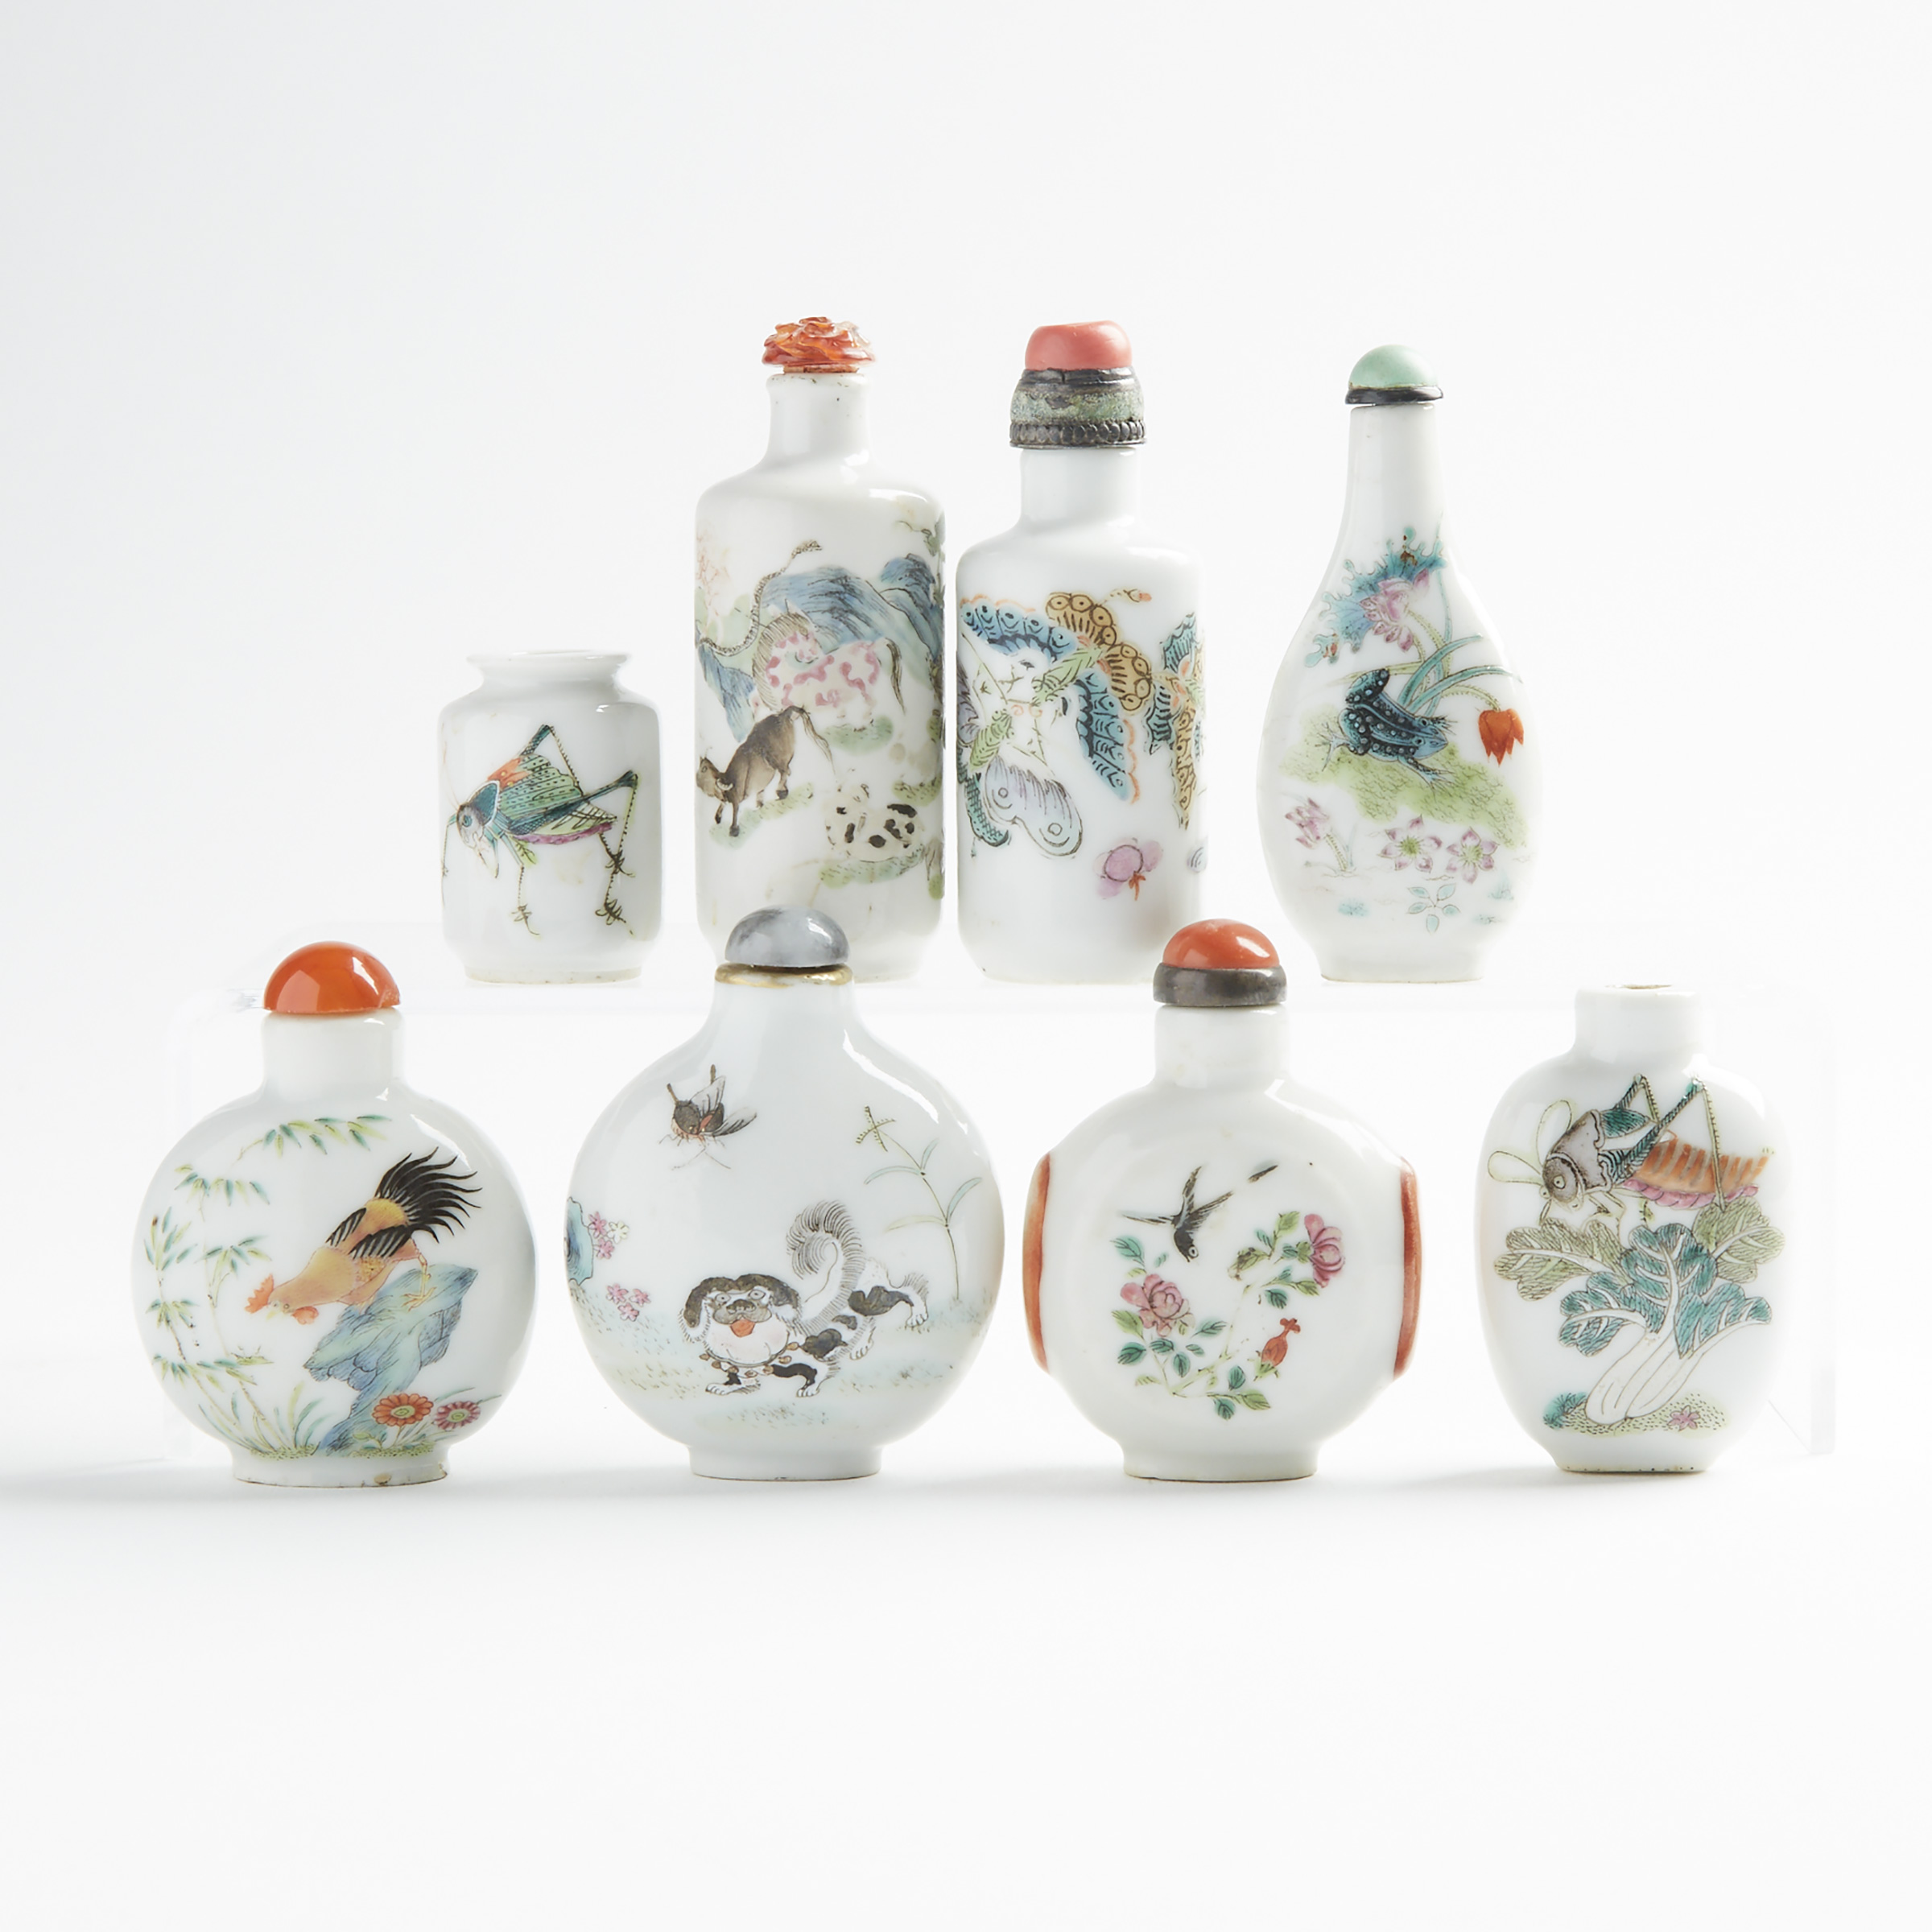 A Group of Eight Enameled Porcelain Snuff Bottles, 19th/20th Century